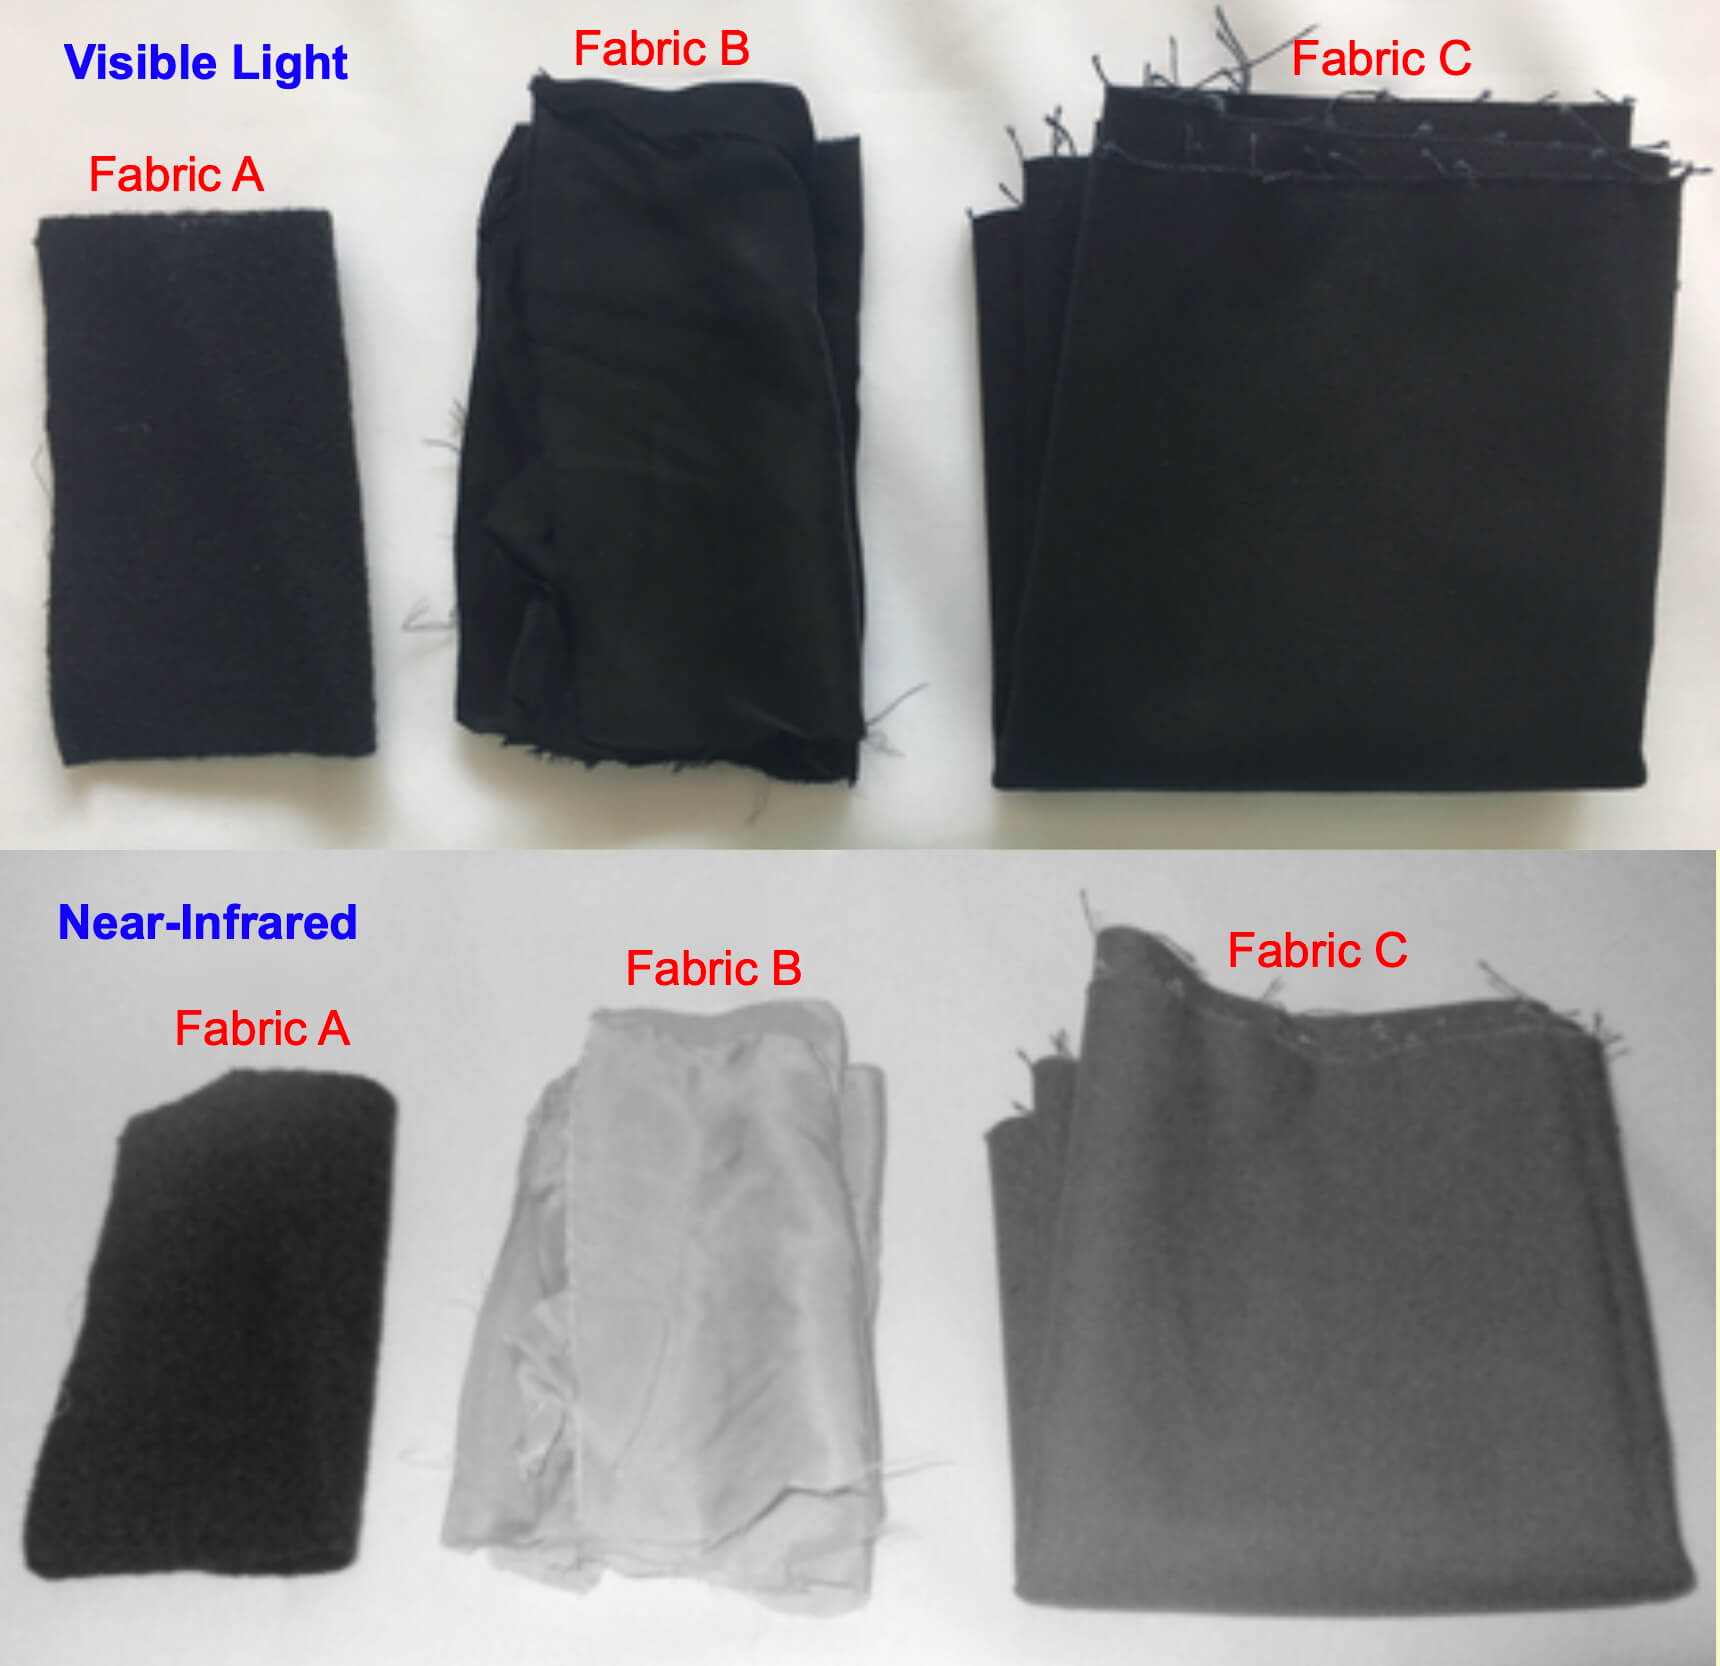 Two images of 3 swatches of black fabric.  One is in visible light, and the other is in near-infrared.